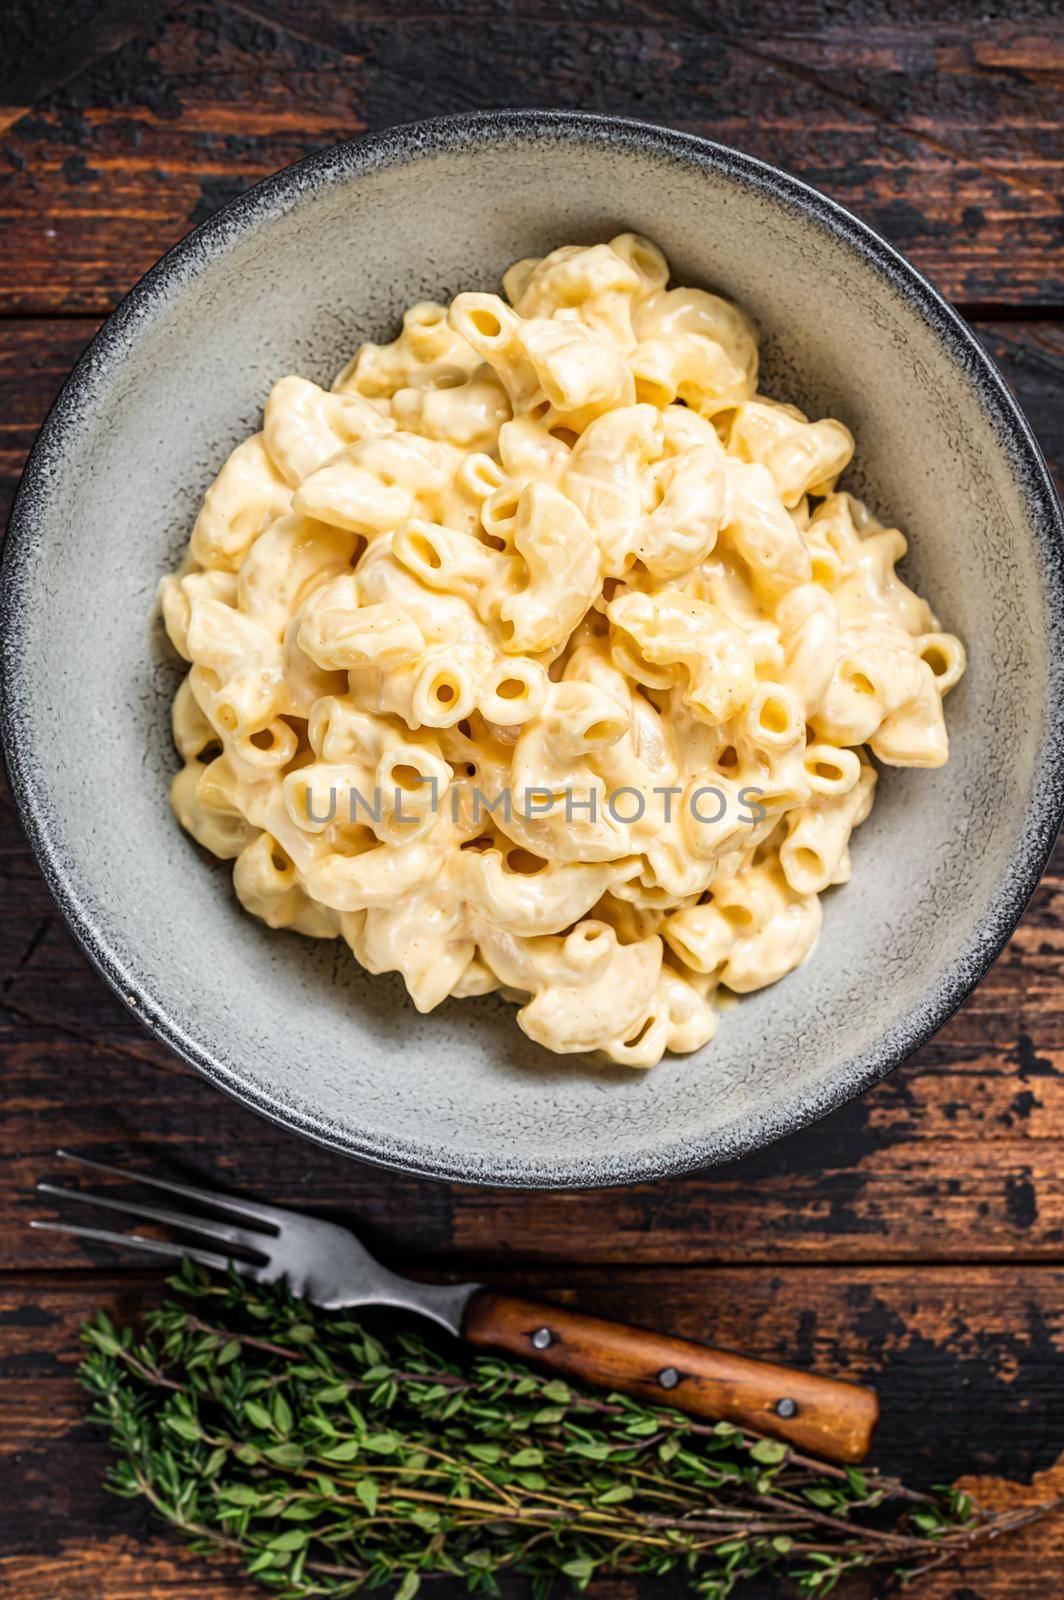 American dish Mac and cheese macaroni pasta with Cheddar. Dark wooden background. Top view.